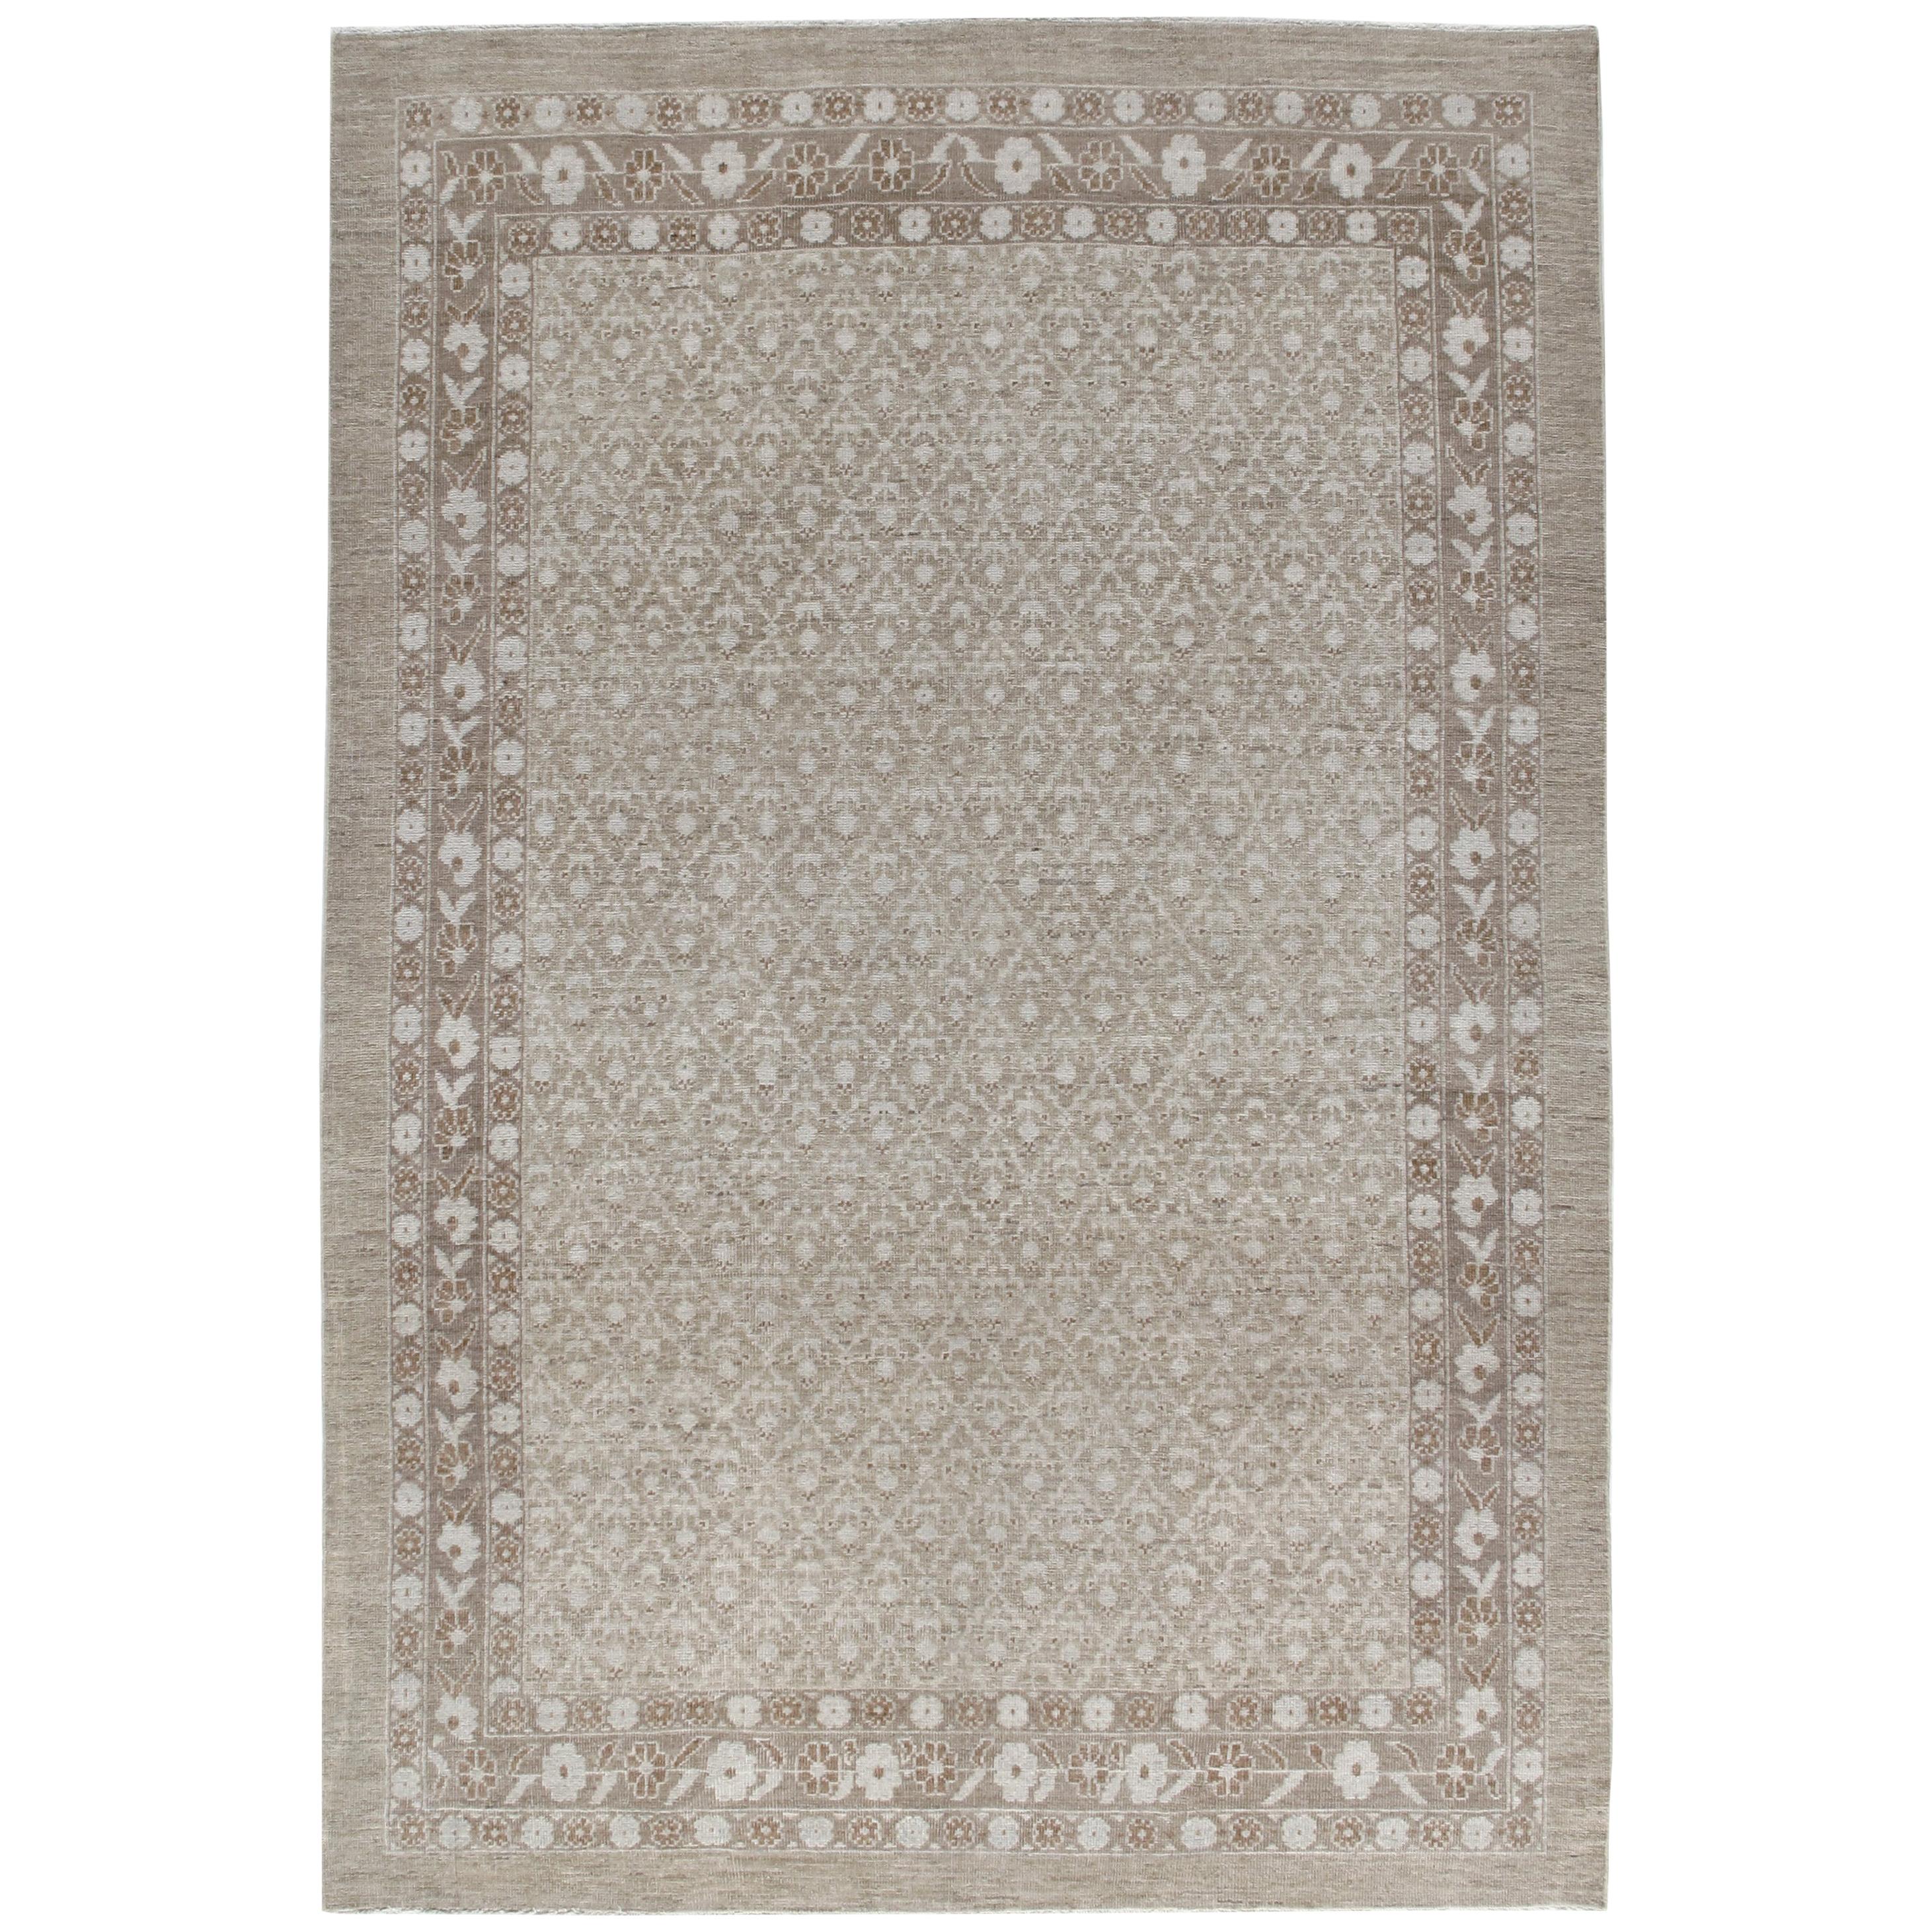 Persian Serab Decorative Handknotted Rug in Camel and Beige Color